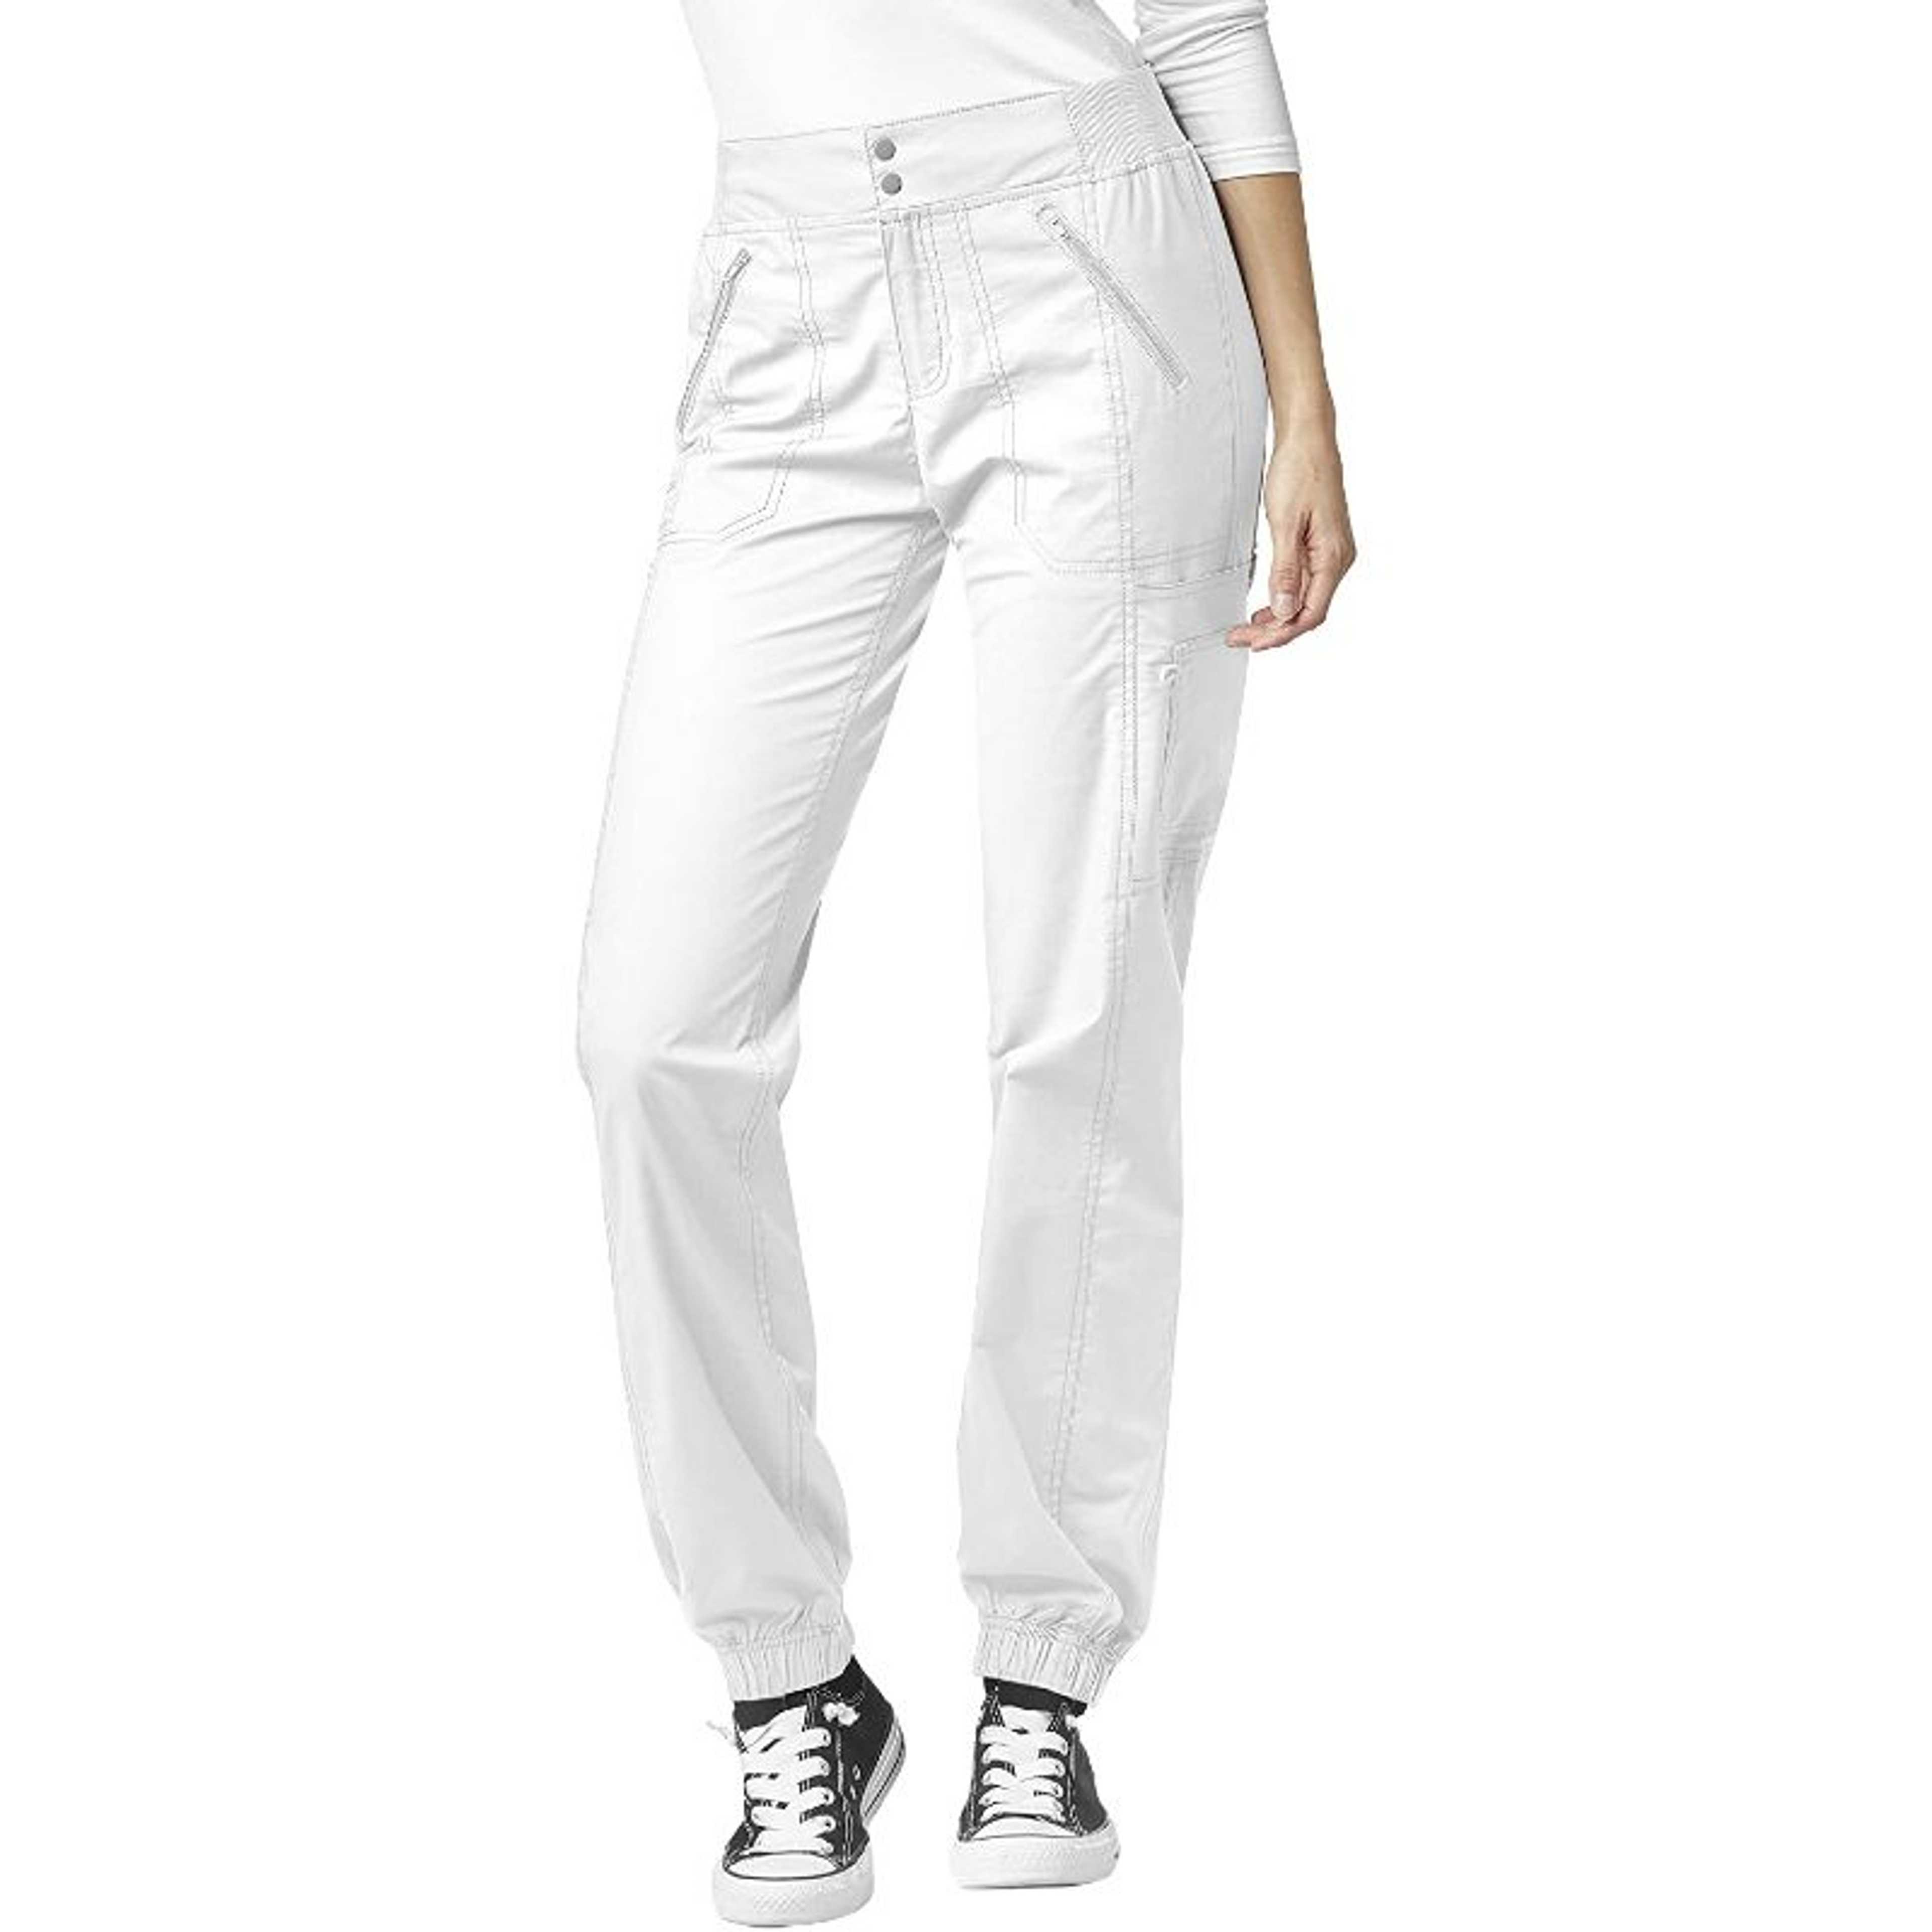 White Rubahas Womens Cargo Trousers Ladies Trousers Jeans Pants